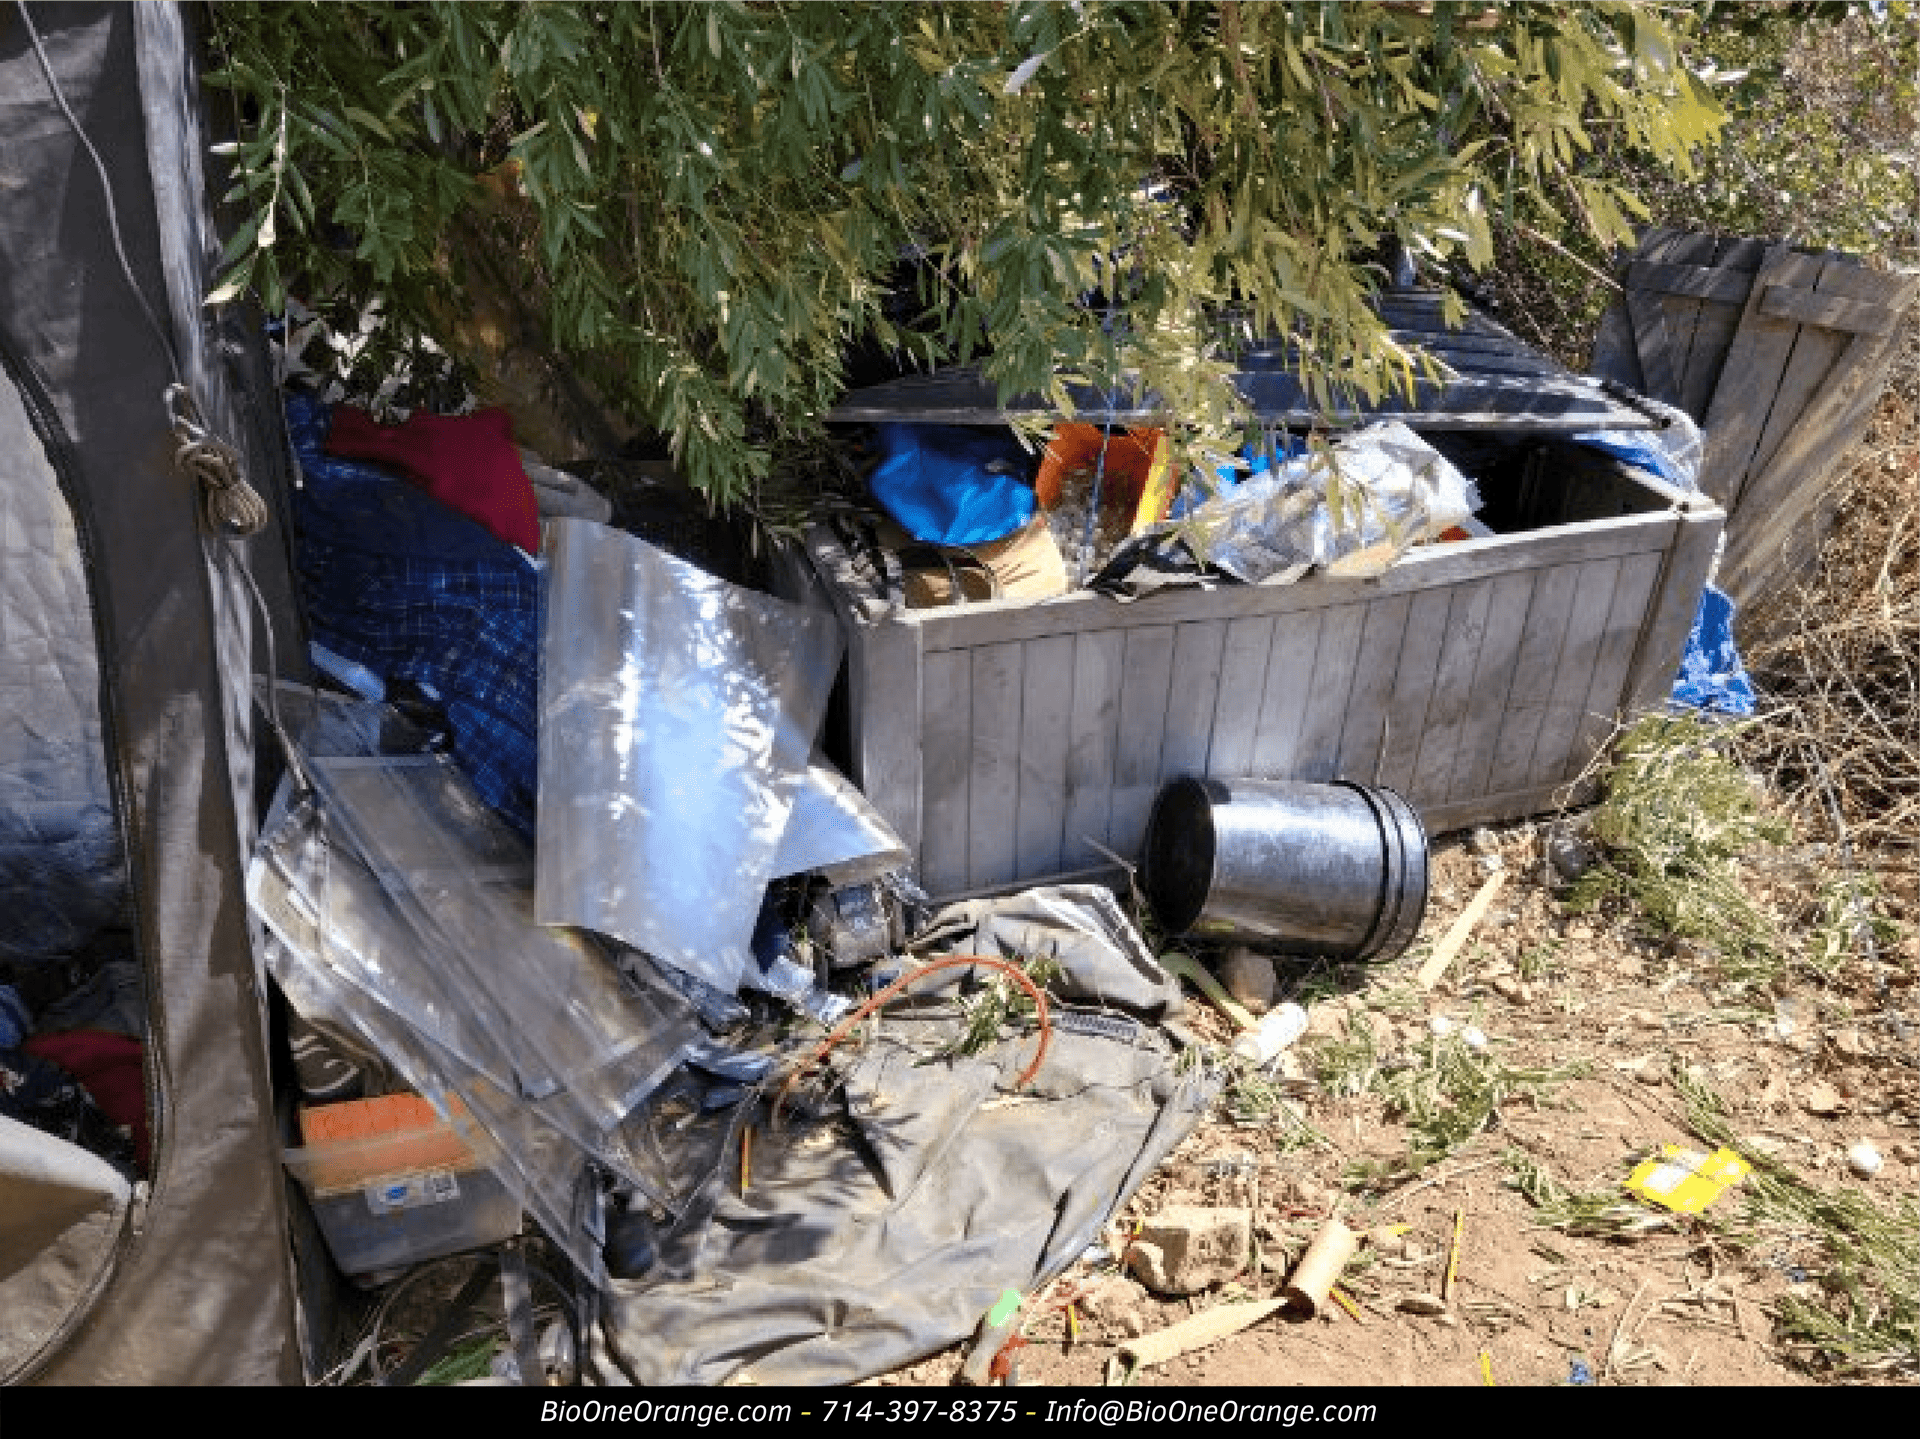 Image shows dumpster and debris found in encampment site near a residential neighborhood.